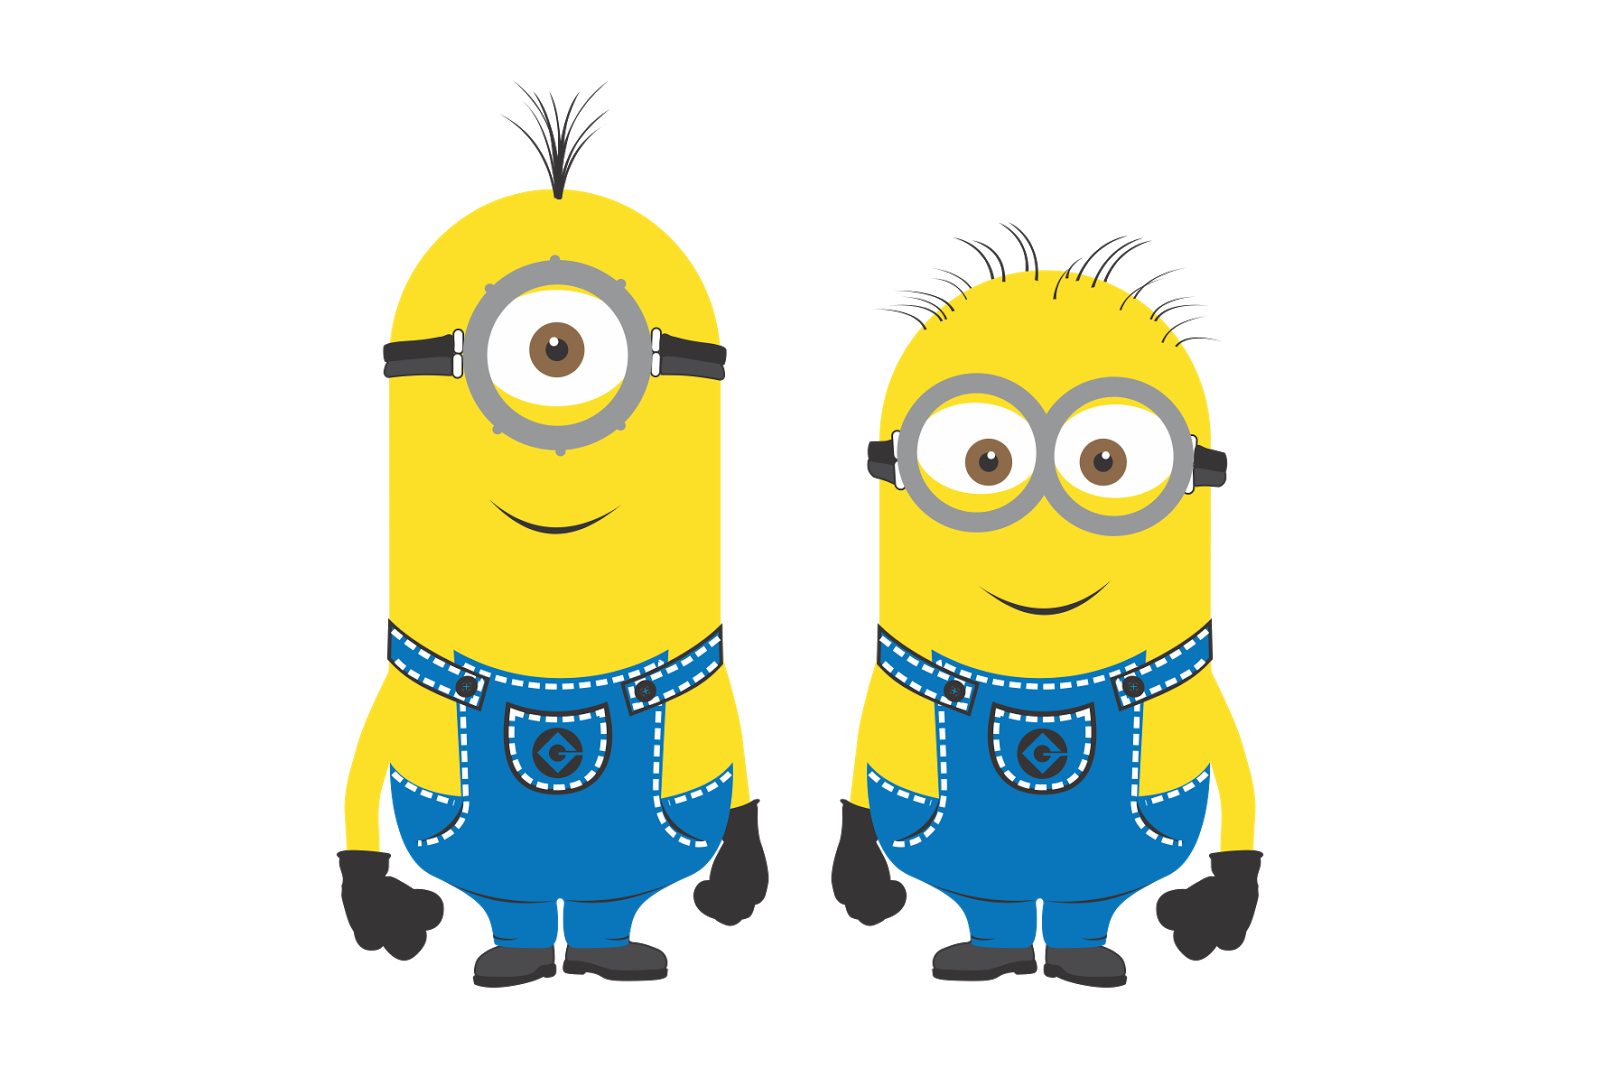 Download Clipart Icon - Minion Logo Cdr Minions Free Photo PNG.